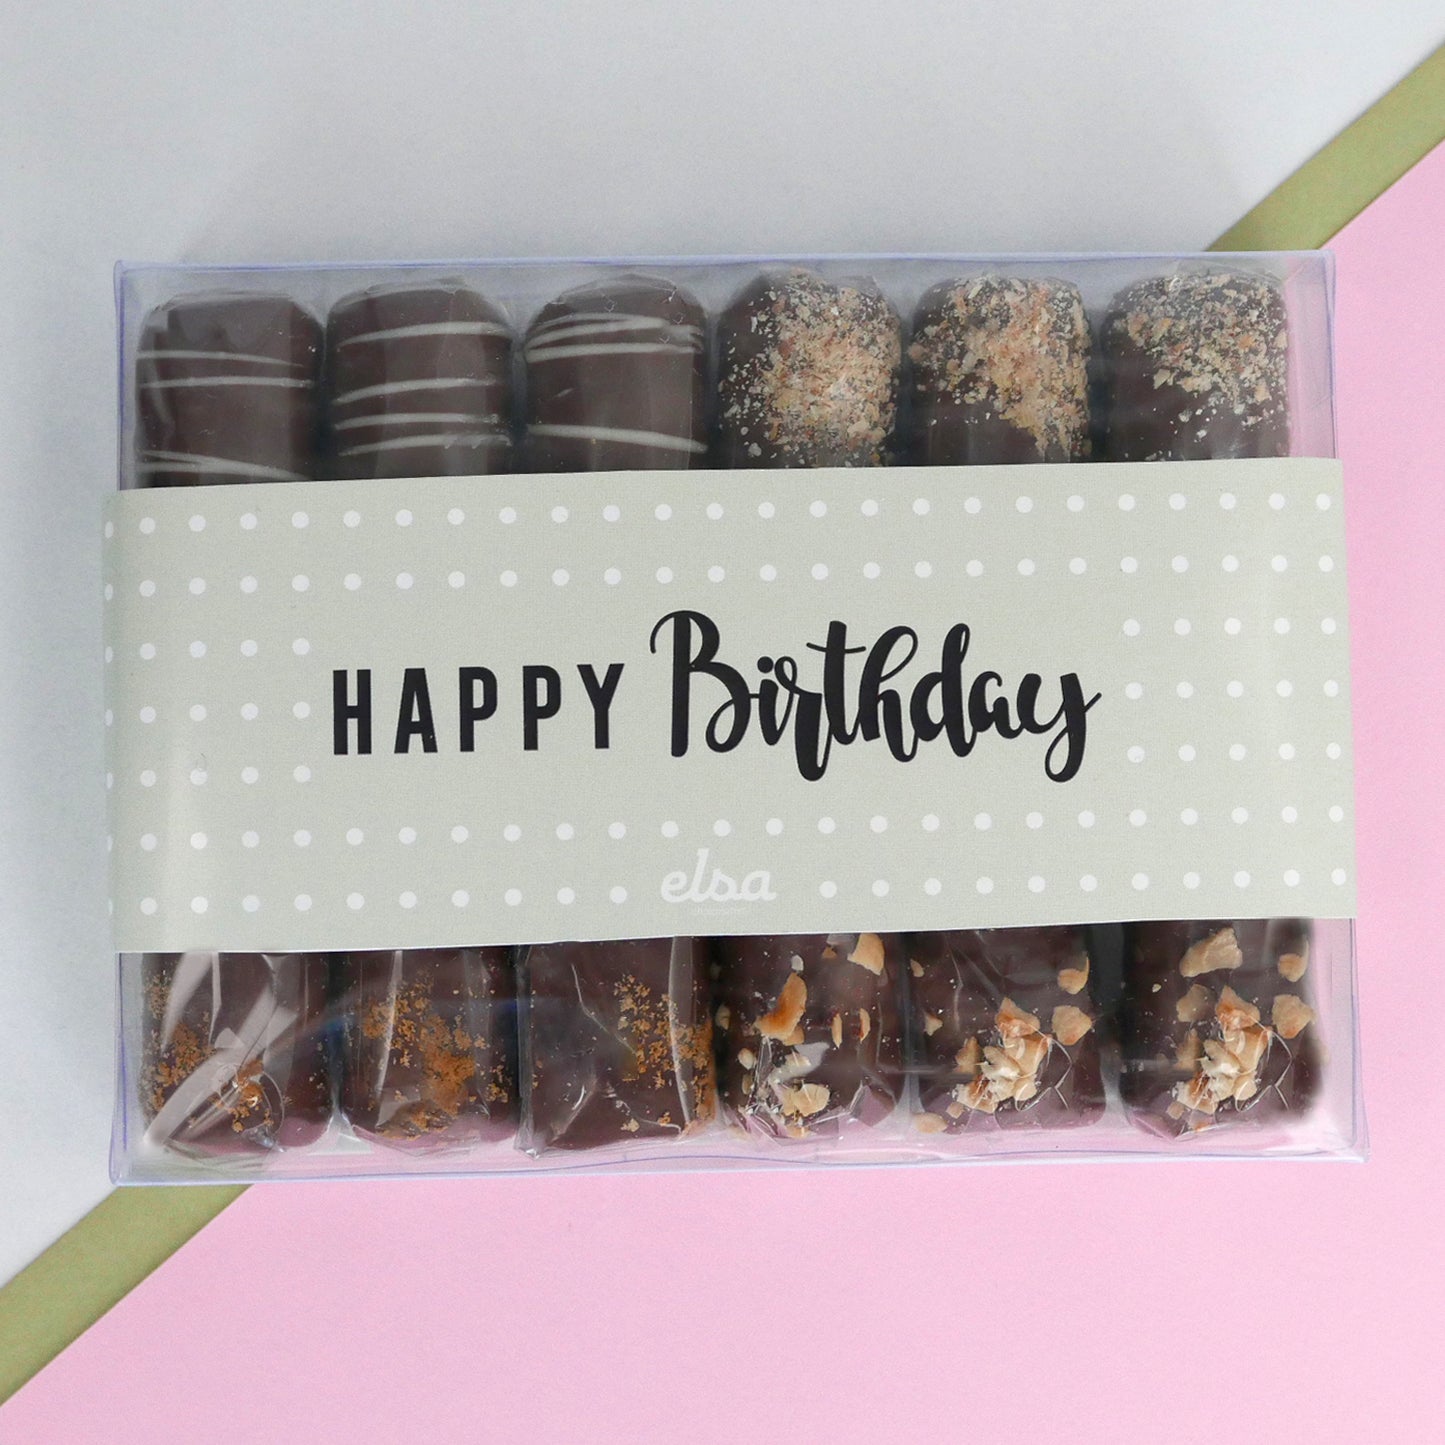 Let's Party - Birthday Chocolate Rolls